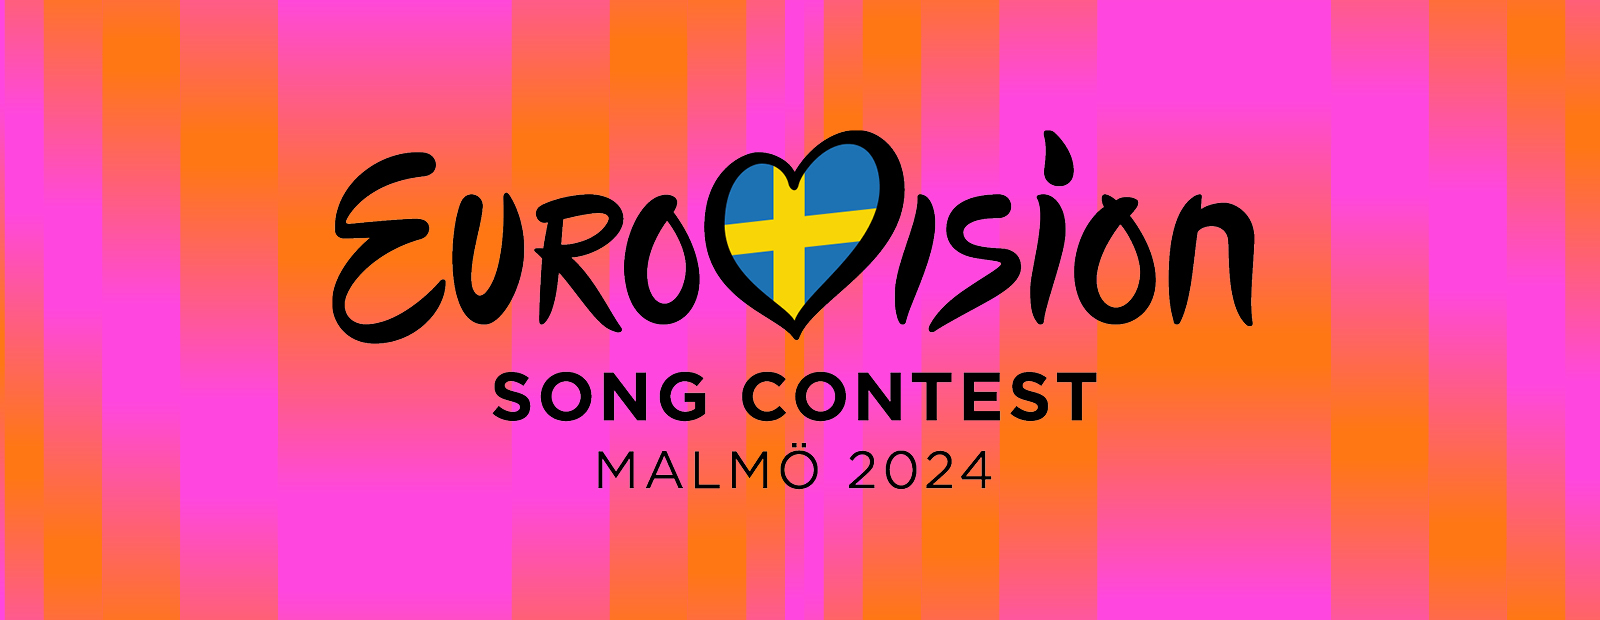 Eurovision Song Contest 2024 Grand Final - Evening Preview